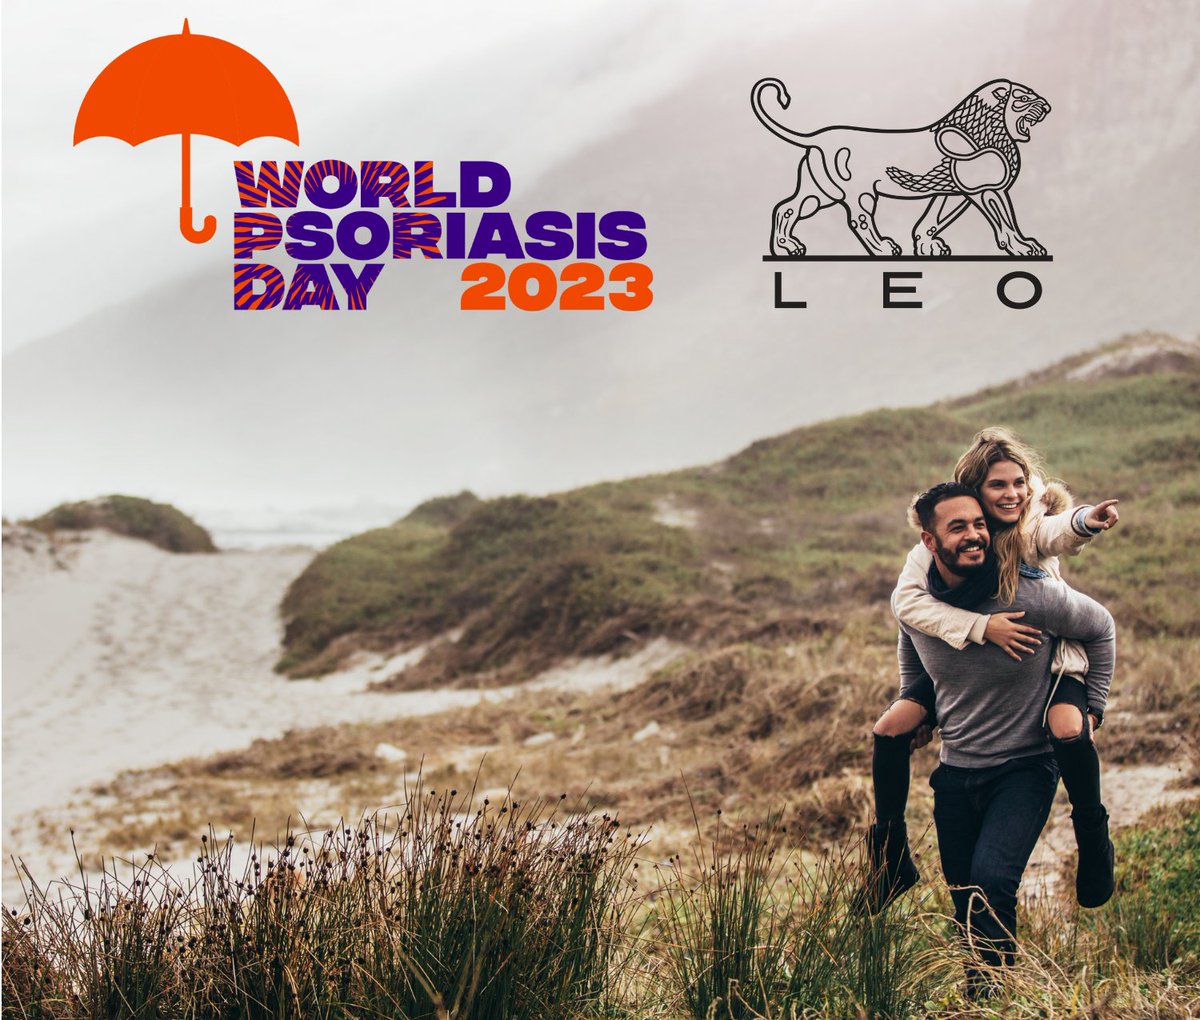 On #WorldPsoriasisDay, the global community unites for action on behalf of those affected by psoriatic disease worldwide. LEO Pharma is proud to support IFPA's work to establish access to quality care for everyone who needs it.

Learn more at brnw.ch/21wDXOg.

#WPD2023